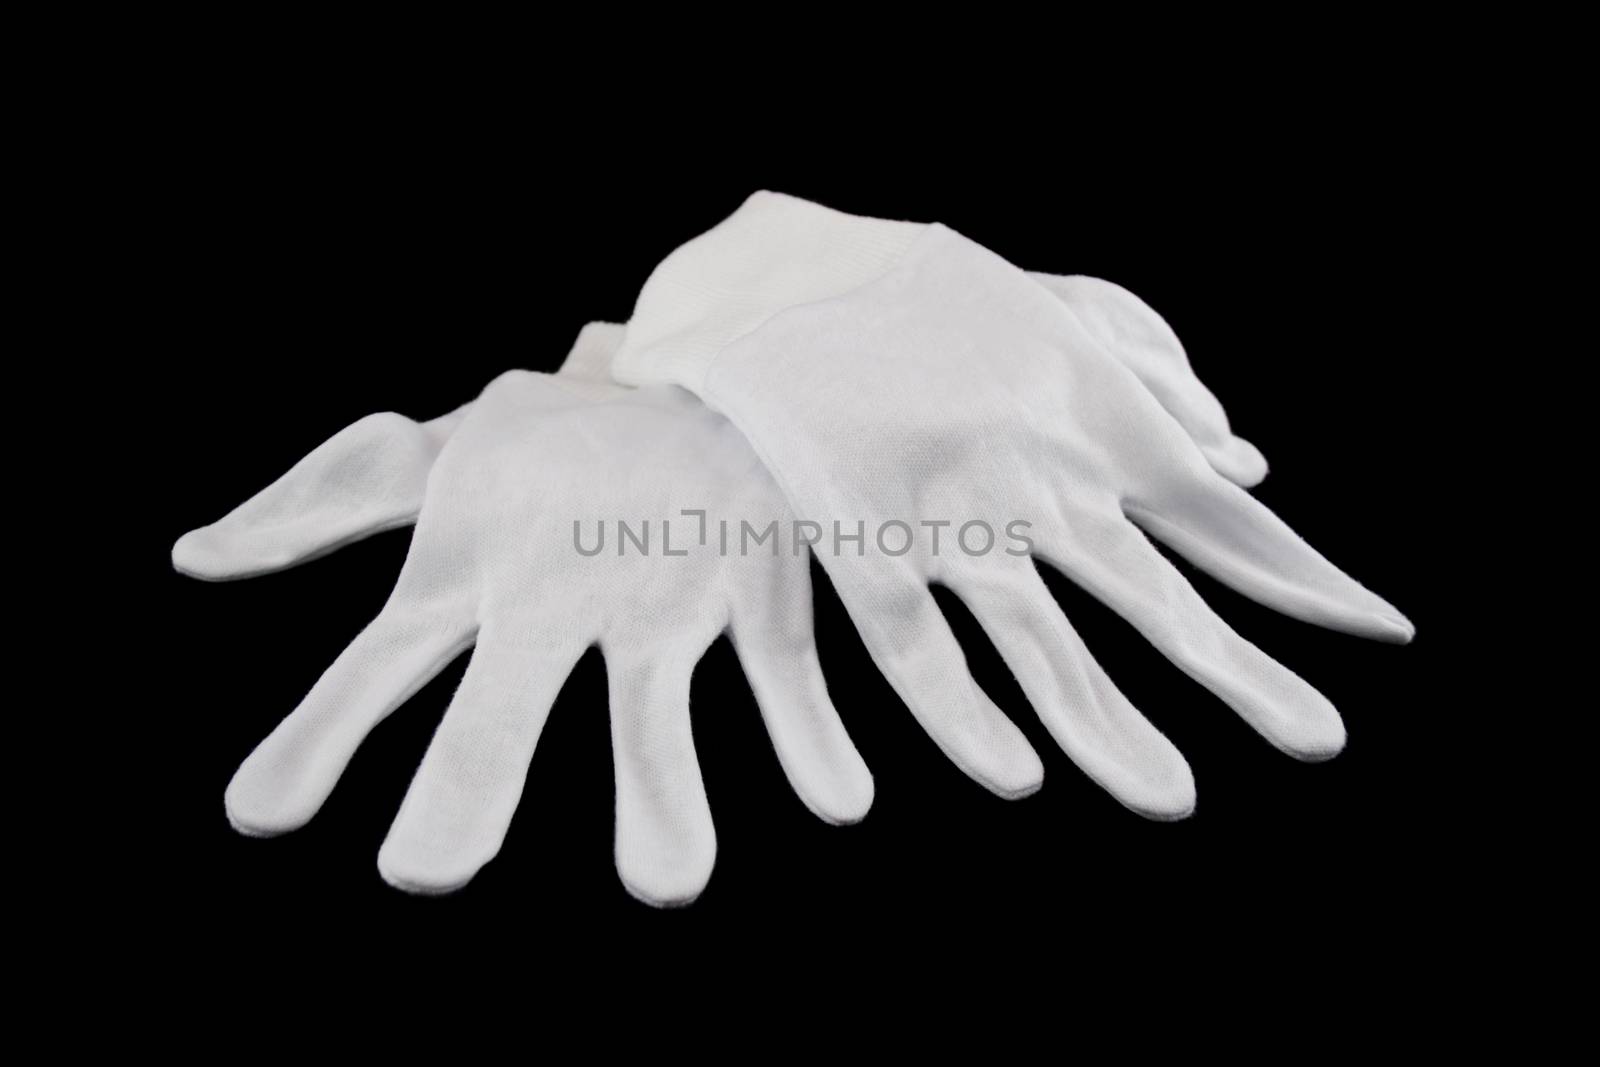 Pair of white gloves with one hand over the other.